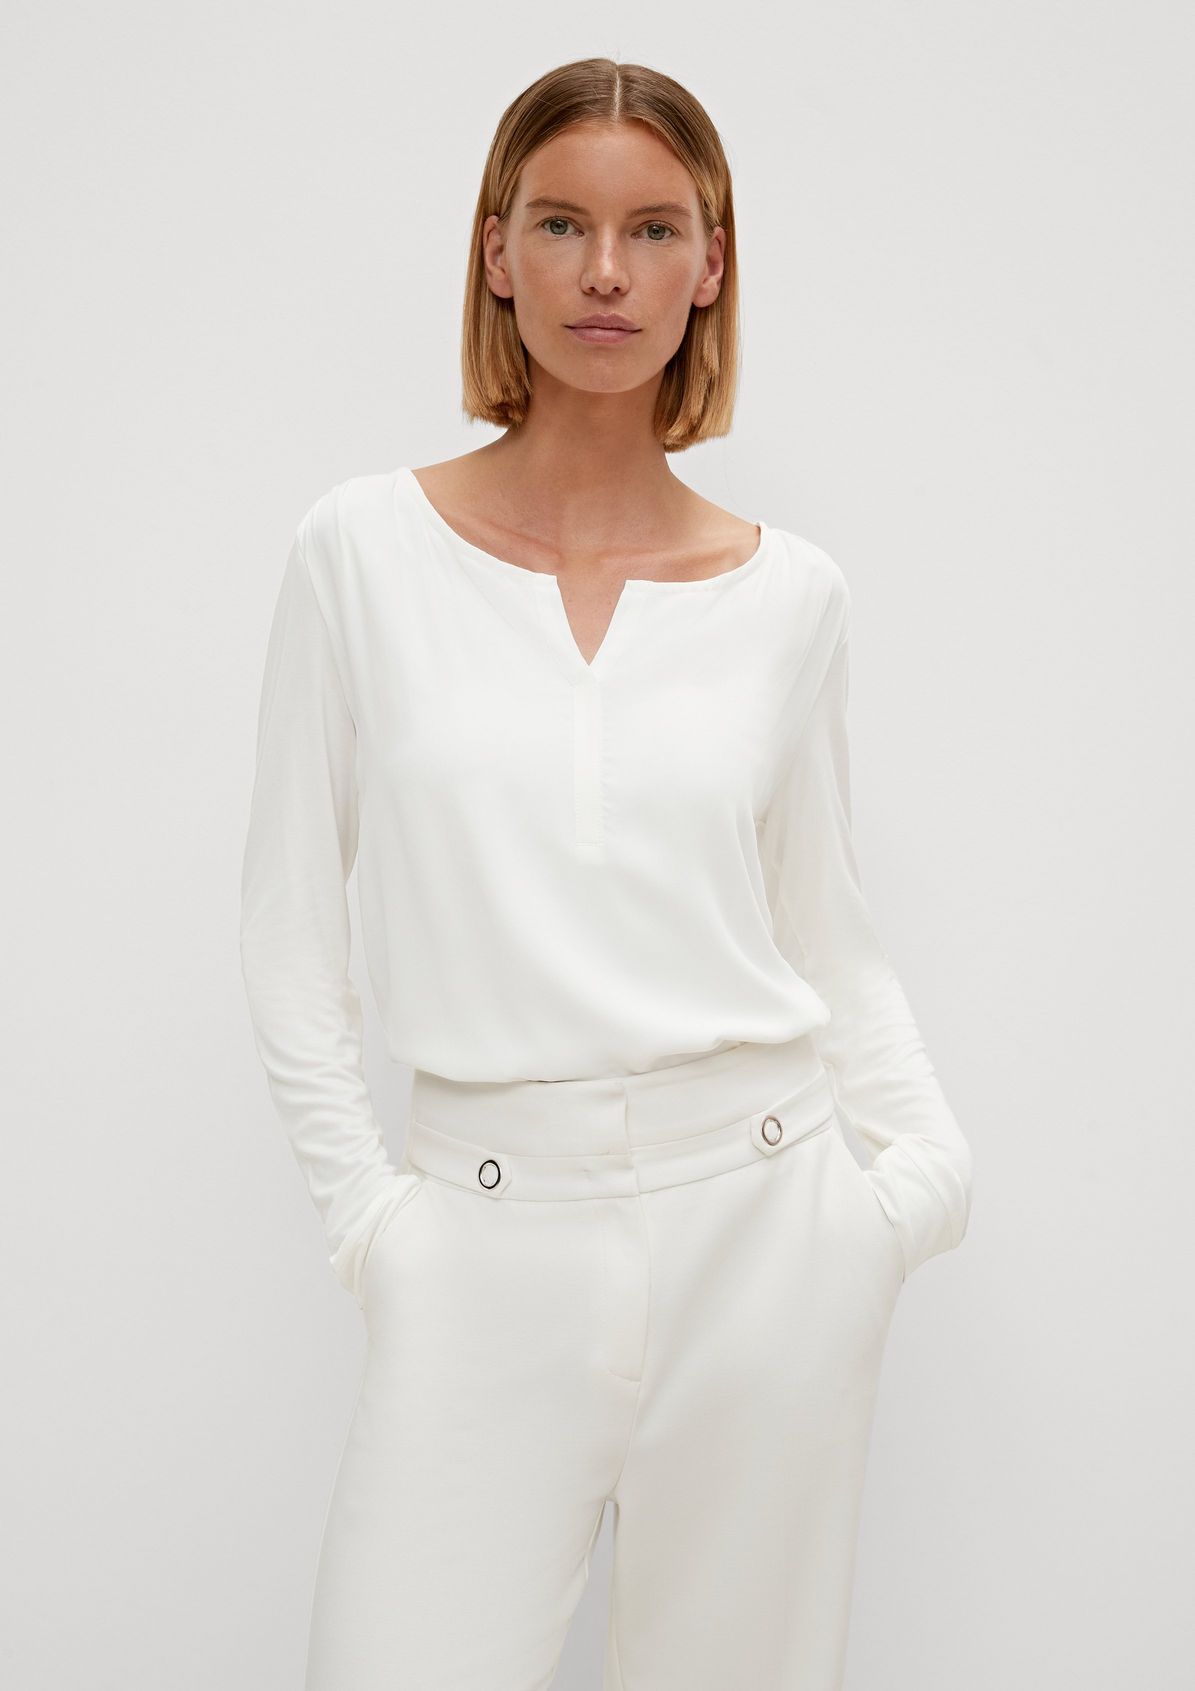 Top with a notch neckline from comma